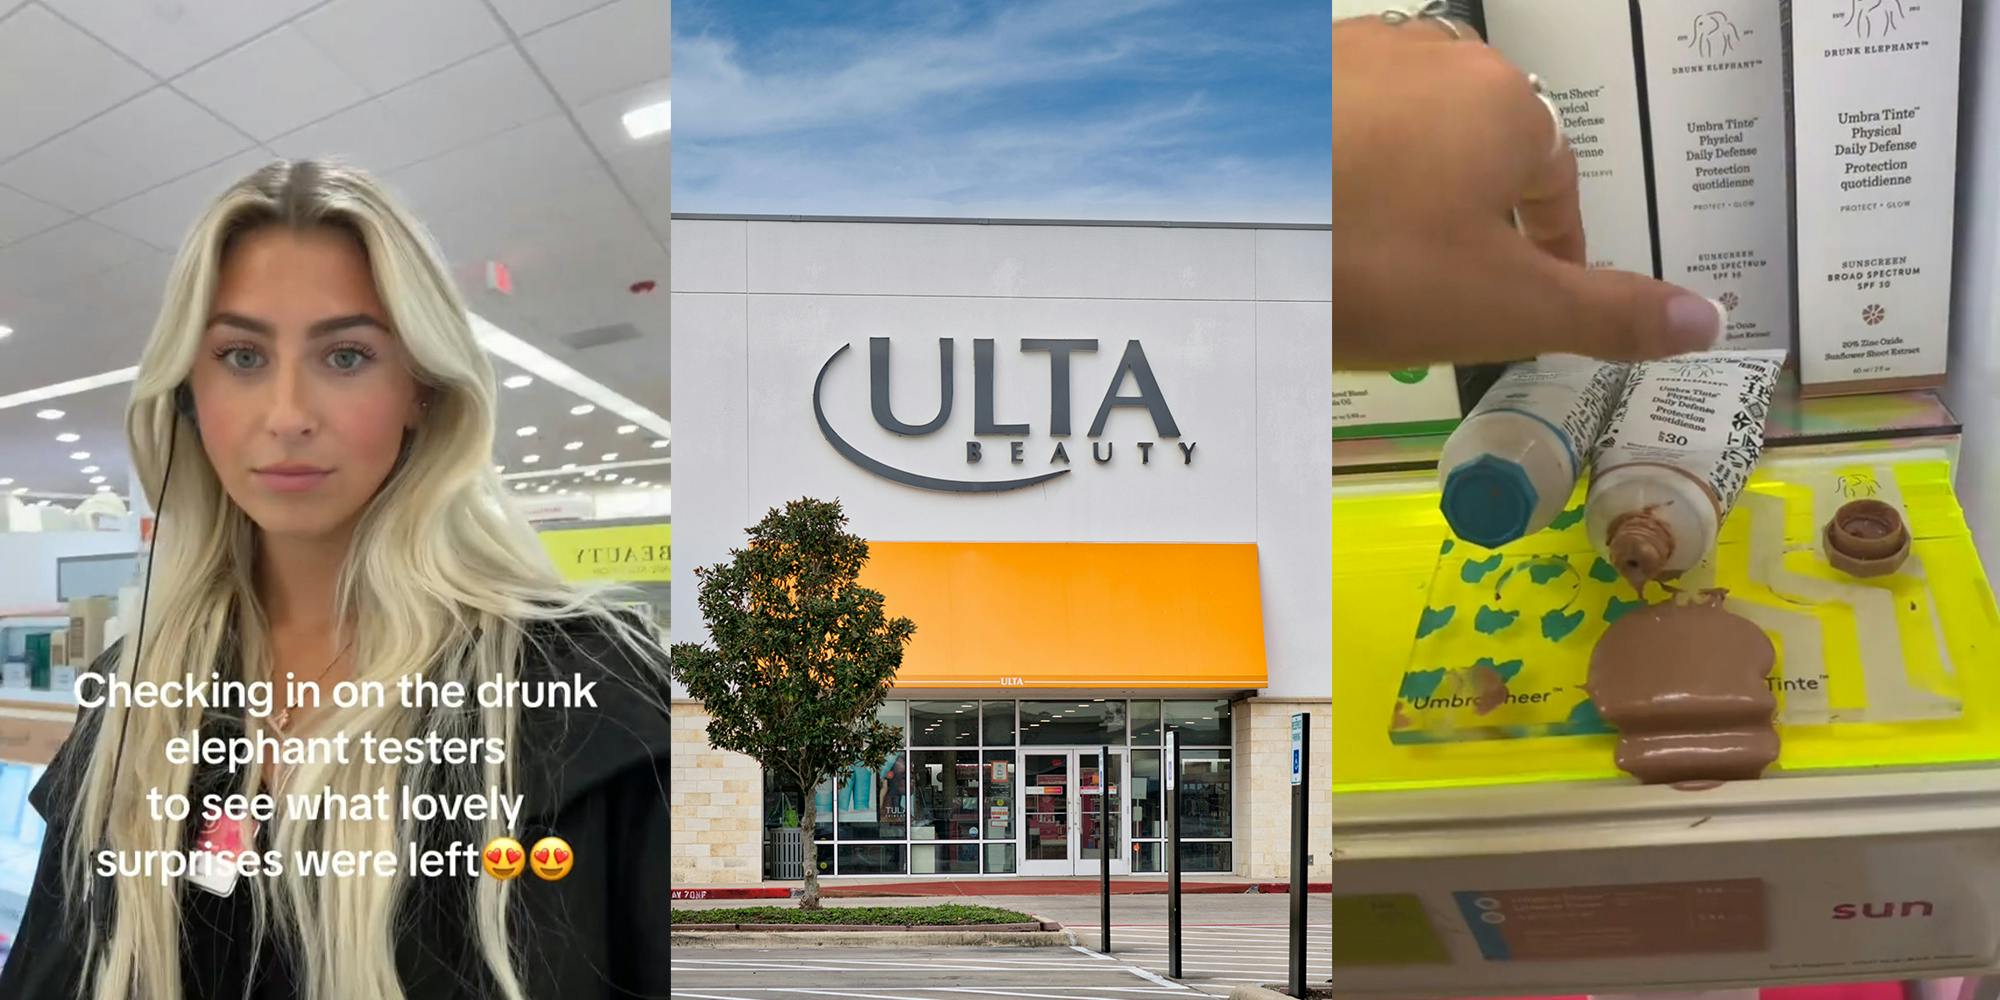 ultabeauty worker shares how customers leave the Drunk Elephant testers